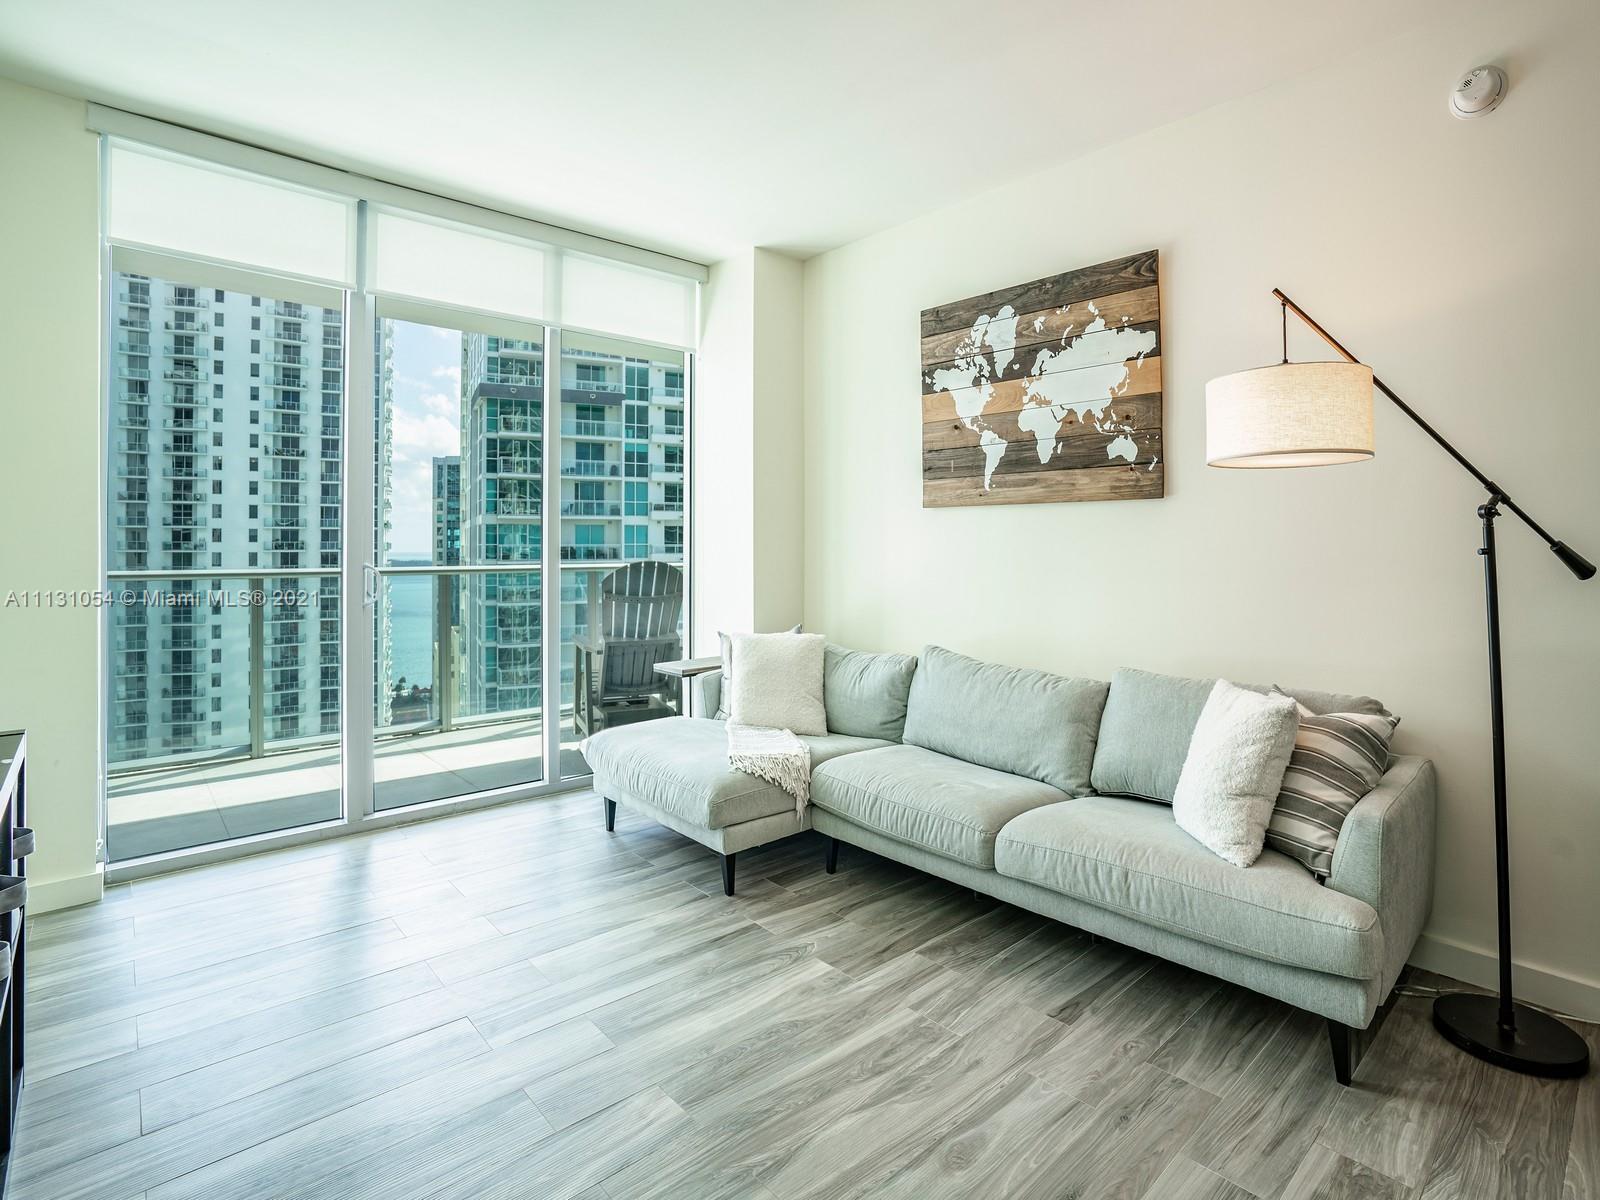 Spectacular 2 Bed / 2 Bath + Den in Millecento - Designed by Pininfarina. If you are looking for a large unit in the heart of Brickell, this is it. This unit offers 2 oversized bedrooms and a Den that can have multiple uses (perfect for an at home office). Enjoy Views of the Brickell Skyline from every room. Beautiful kitchen w/quartz counters, top of the line appliances. Huge balcony with approx.
300 SF. The building offers 5 star amenities including a gym, roof top pool w/ stunning City & Bay views, 2nd pool on the 9th floor, Lounge, Community room, Sauna, Theater, Business Center, and more. Millicento is close to EVERYTHING - Mary Brickell Village, Brickell City Centre, the Metro, etc.